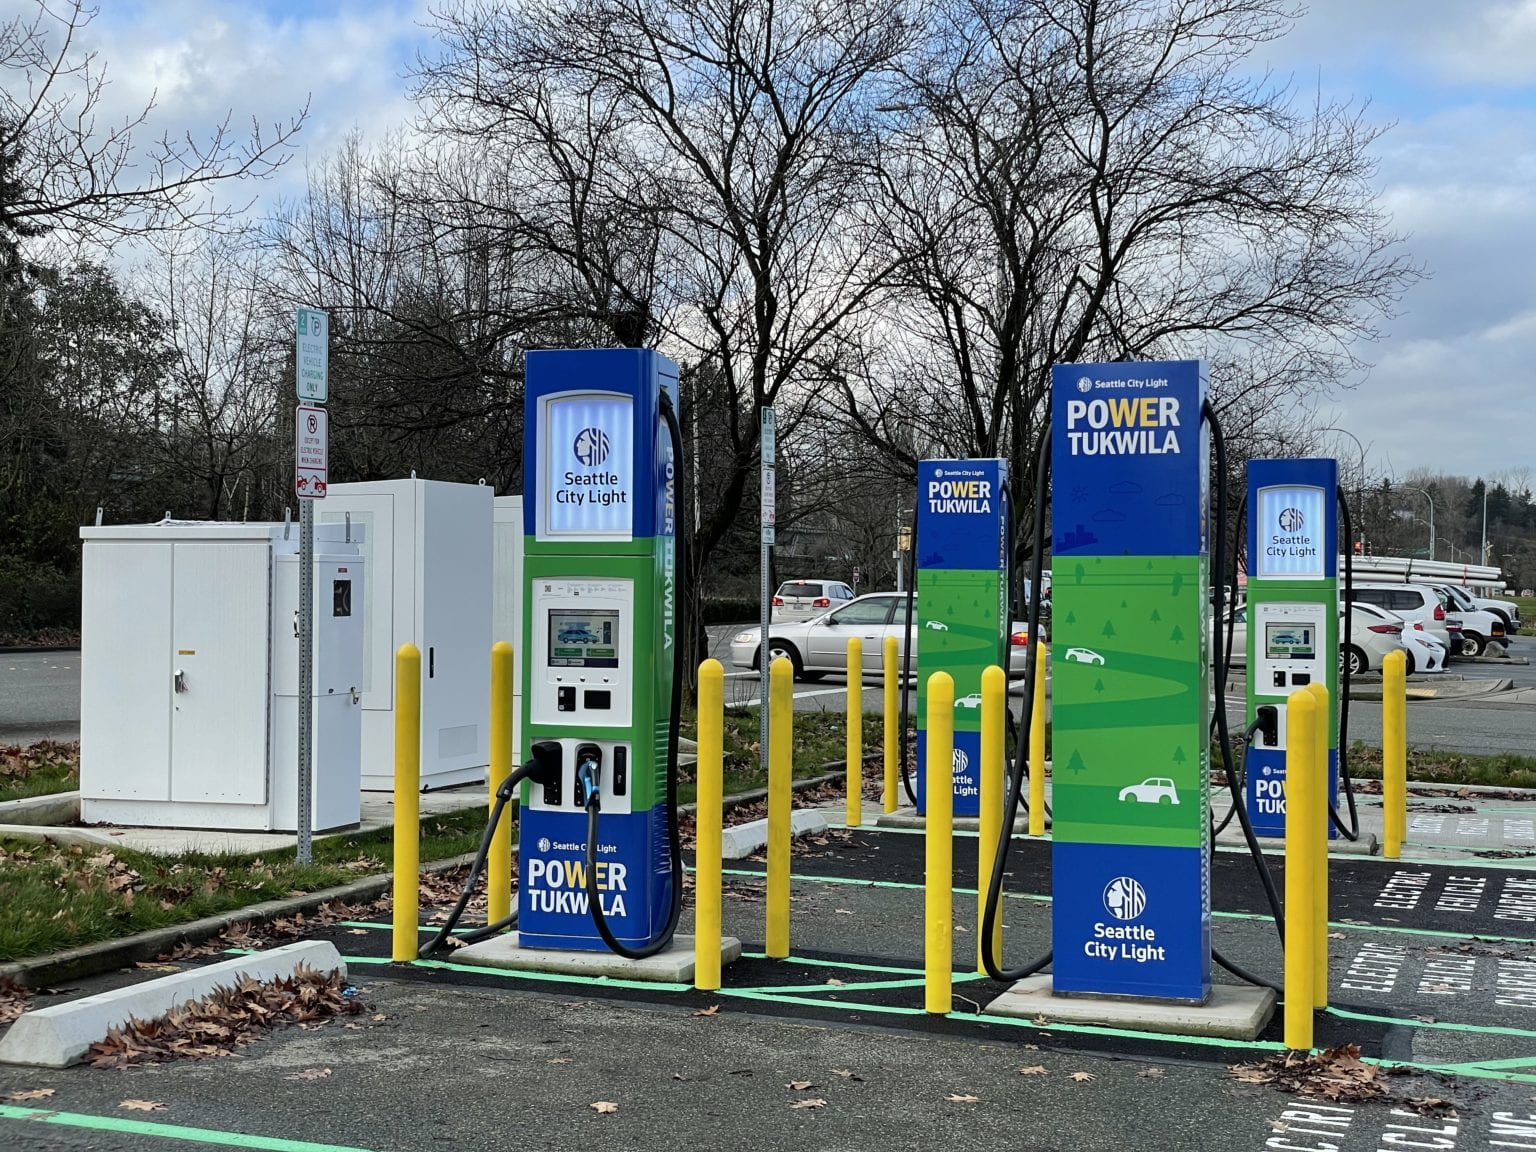 seattle-city-light-unveils-new-electric-vehicle-chargers-in-tukwila